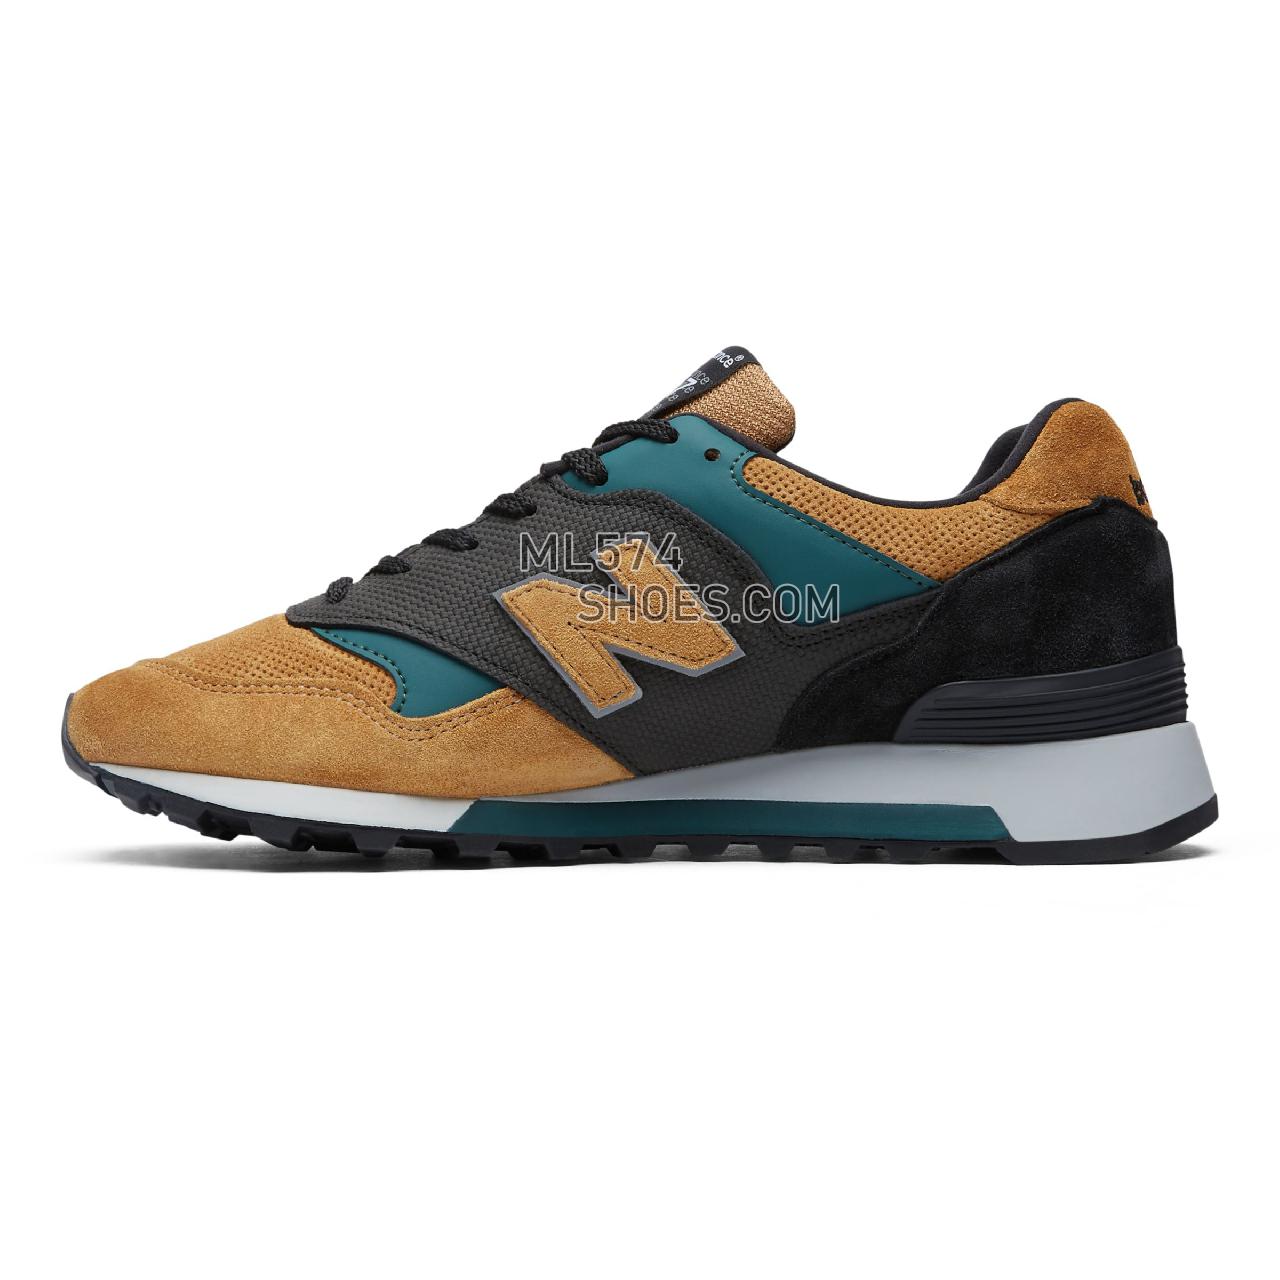 New Balance Made in UK 577 - Men's Made in UK 577 Classic ML577V1-27415-M - Tan with Green and Black - M577TGK